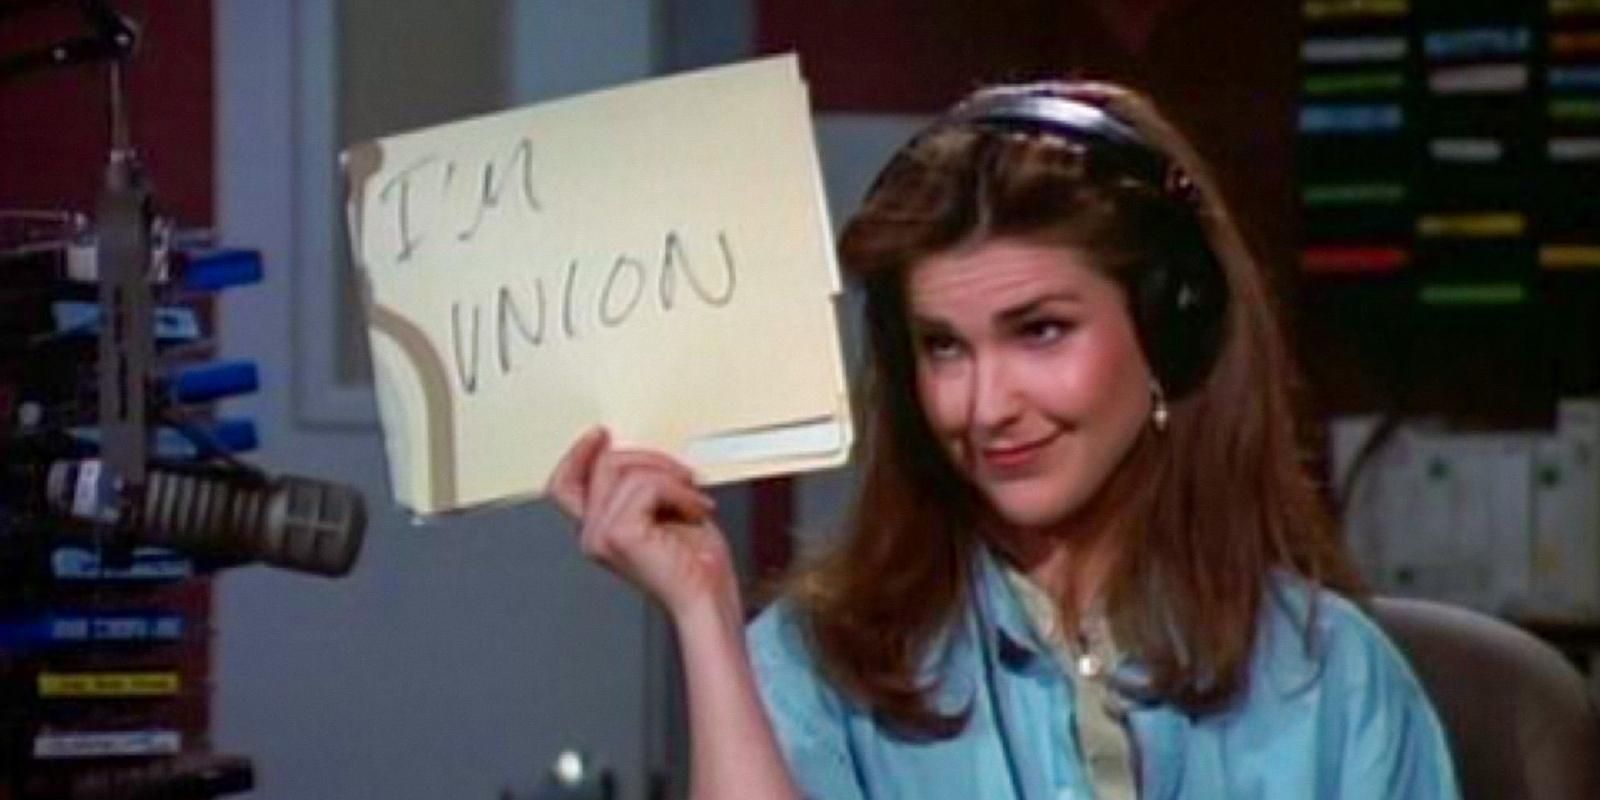 Roz Doyle holds up a sign saying, "I'm union," in Frasier